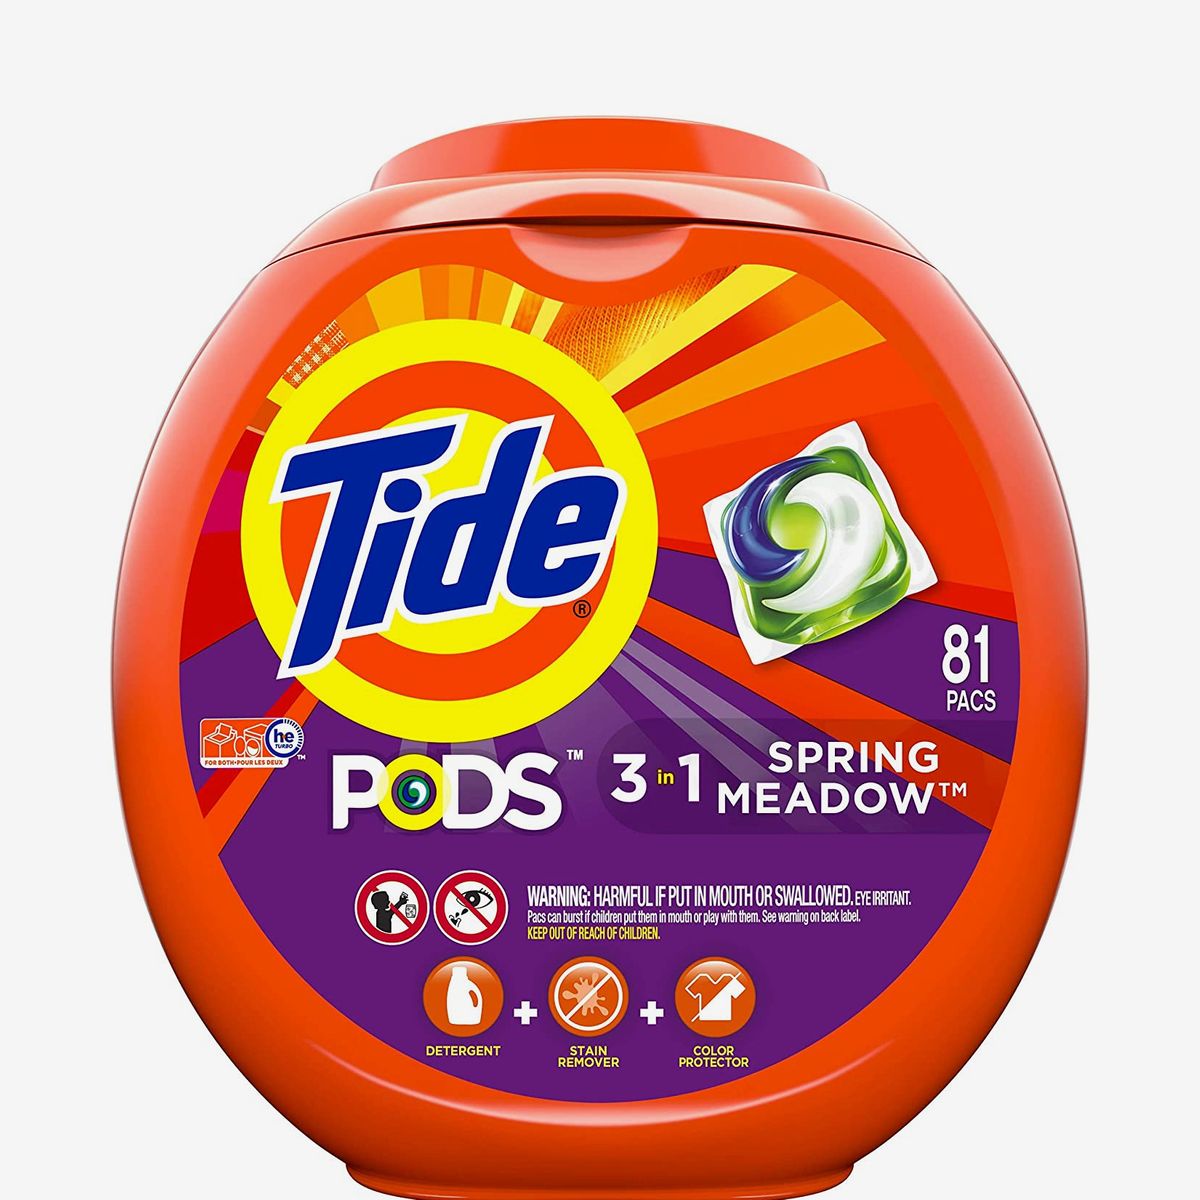 best laundry detergent for clothes